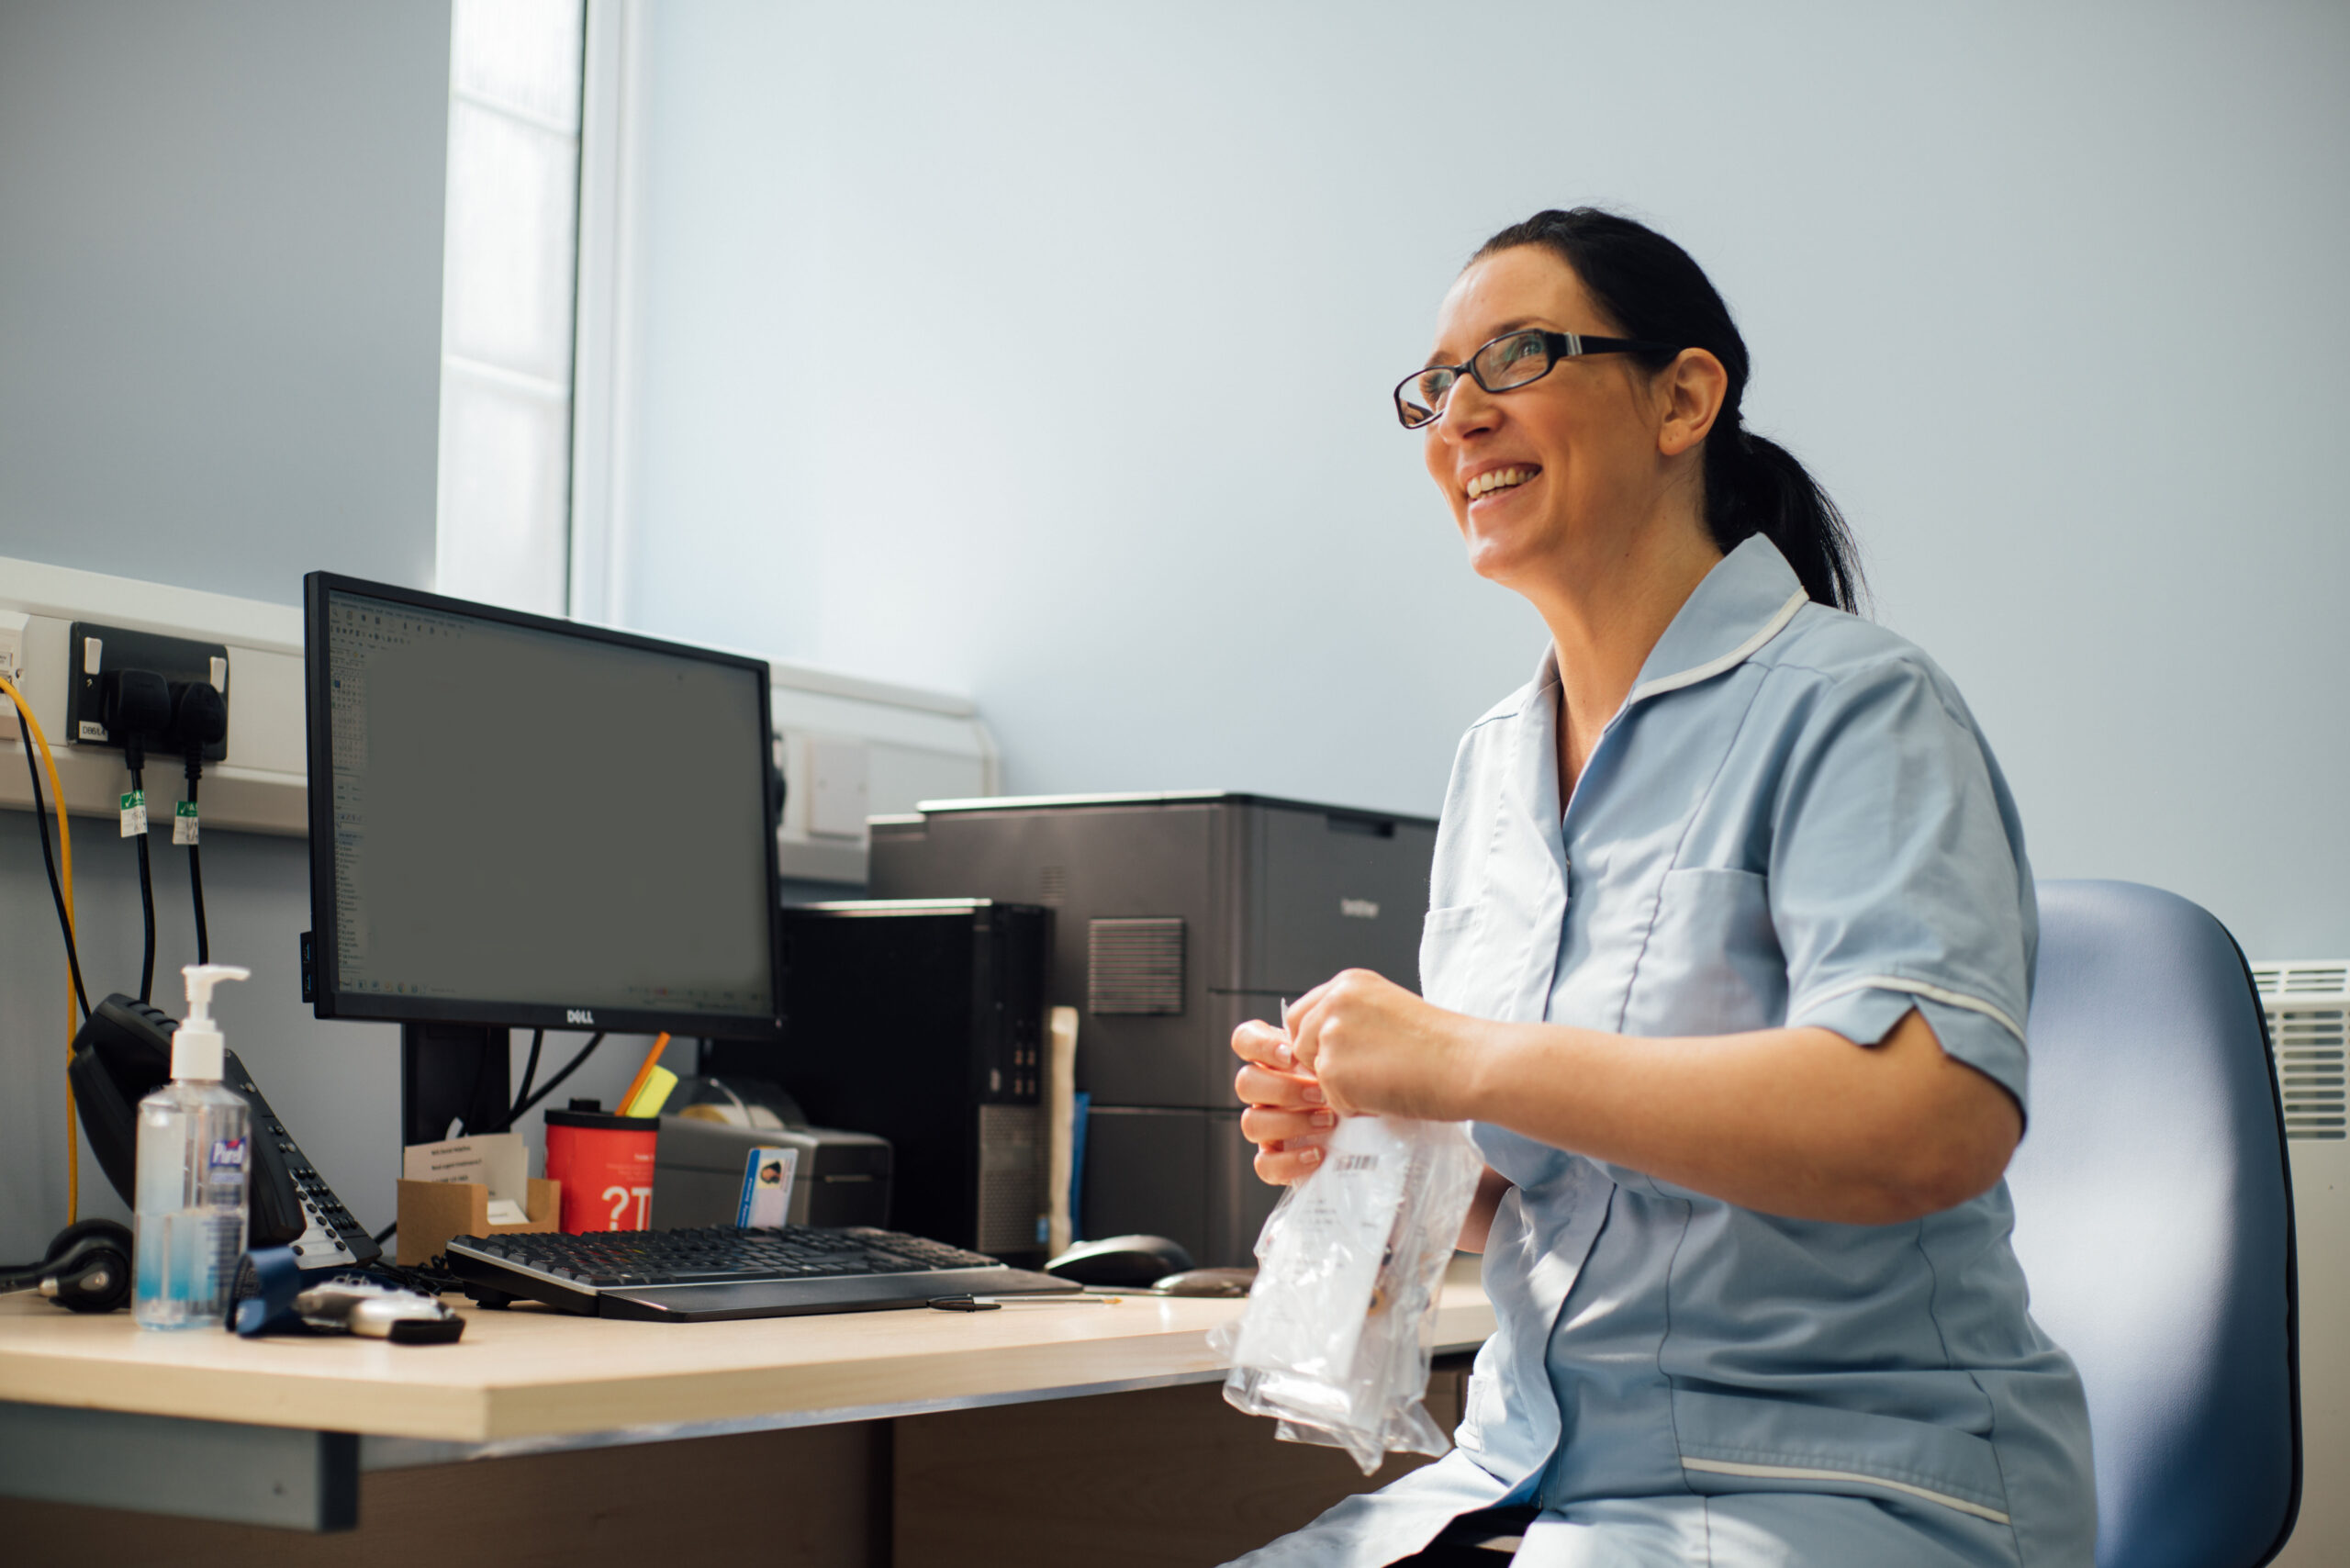 Arch healthcare assistant sits at her desk, smiling at someone off camera